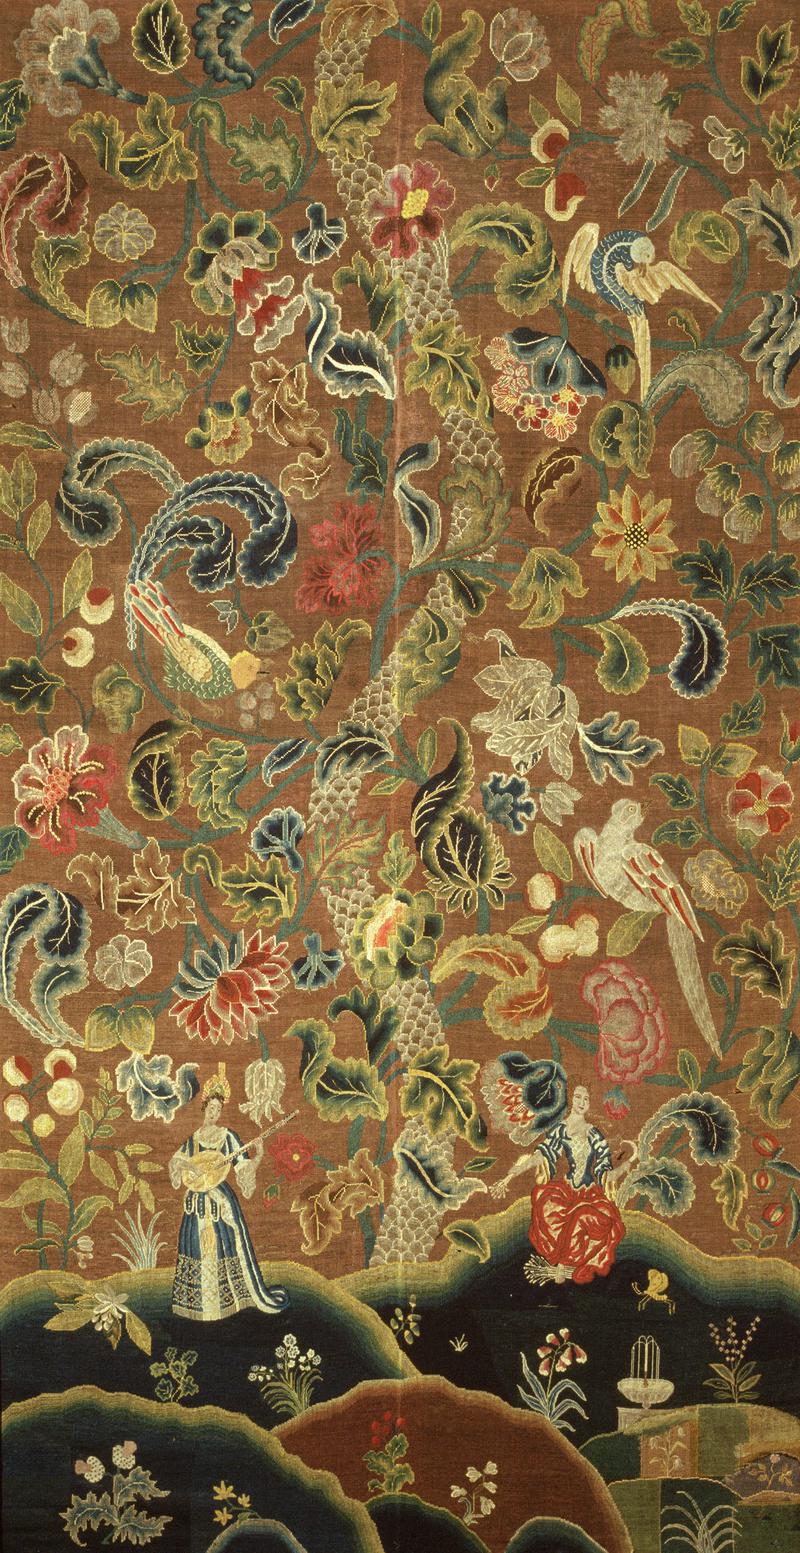 Embroidered wall hanging, part of set from a room in Bryncunallt, Chirk, c. 1710-20